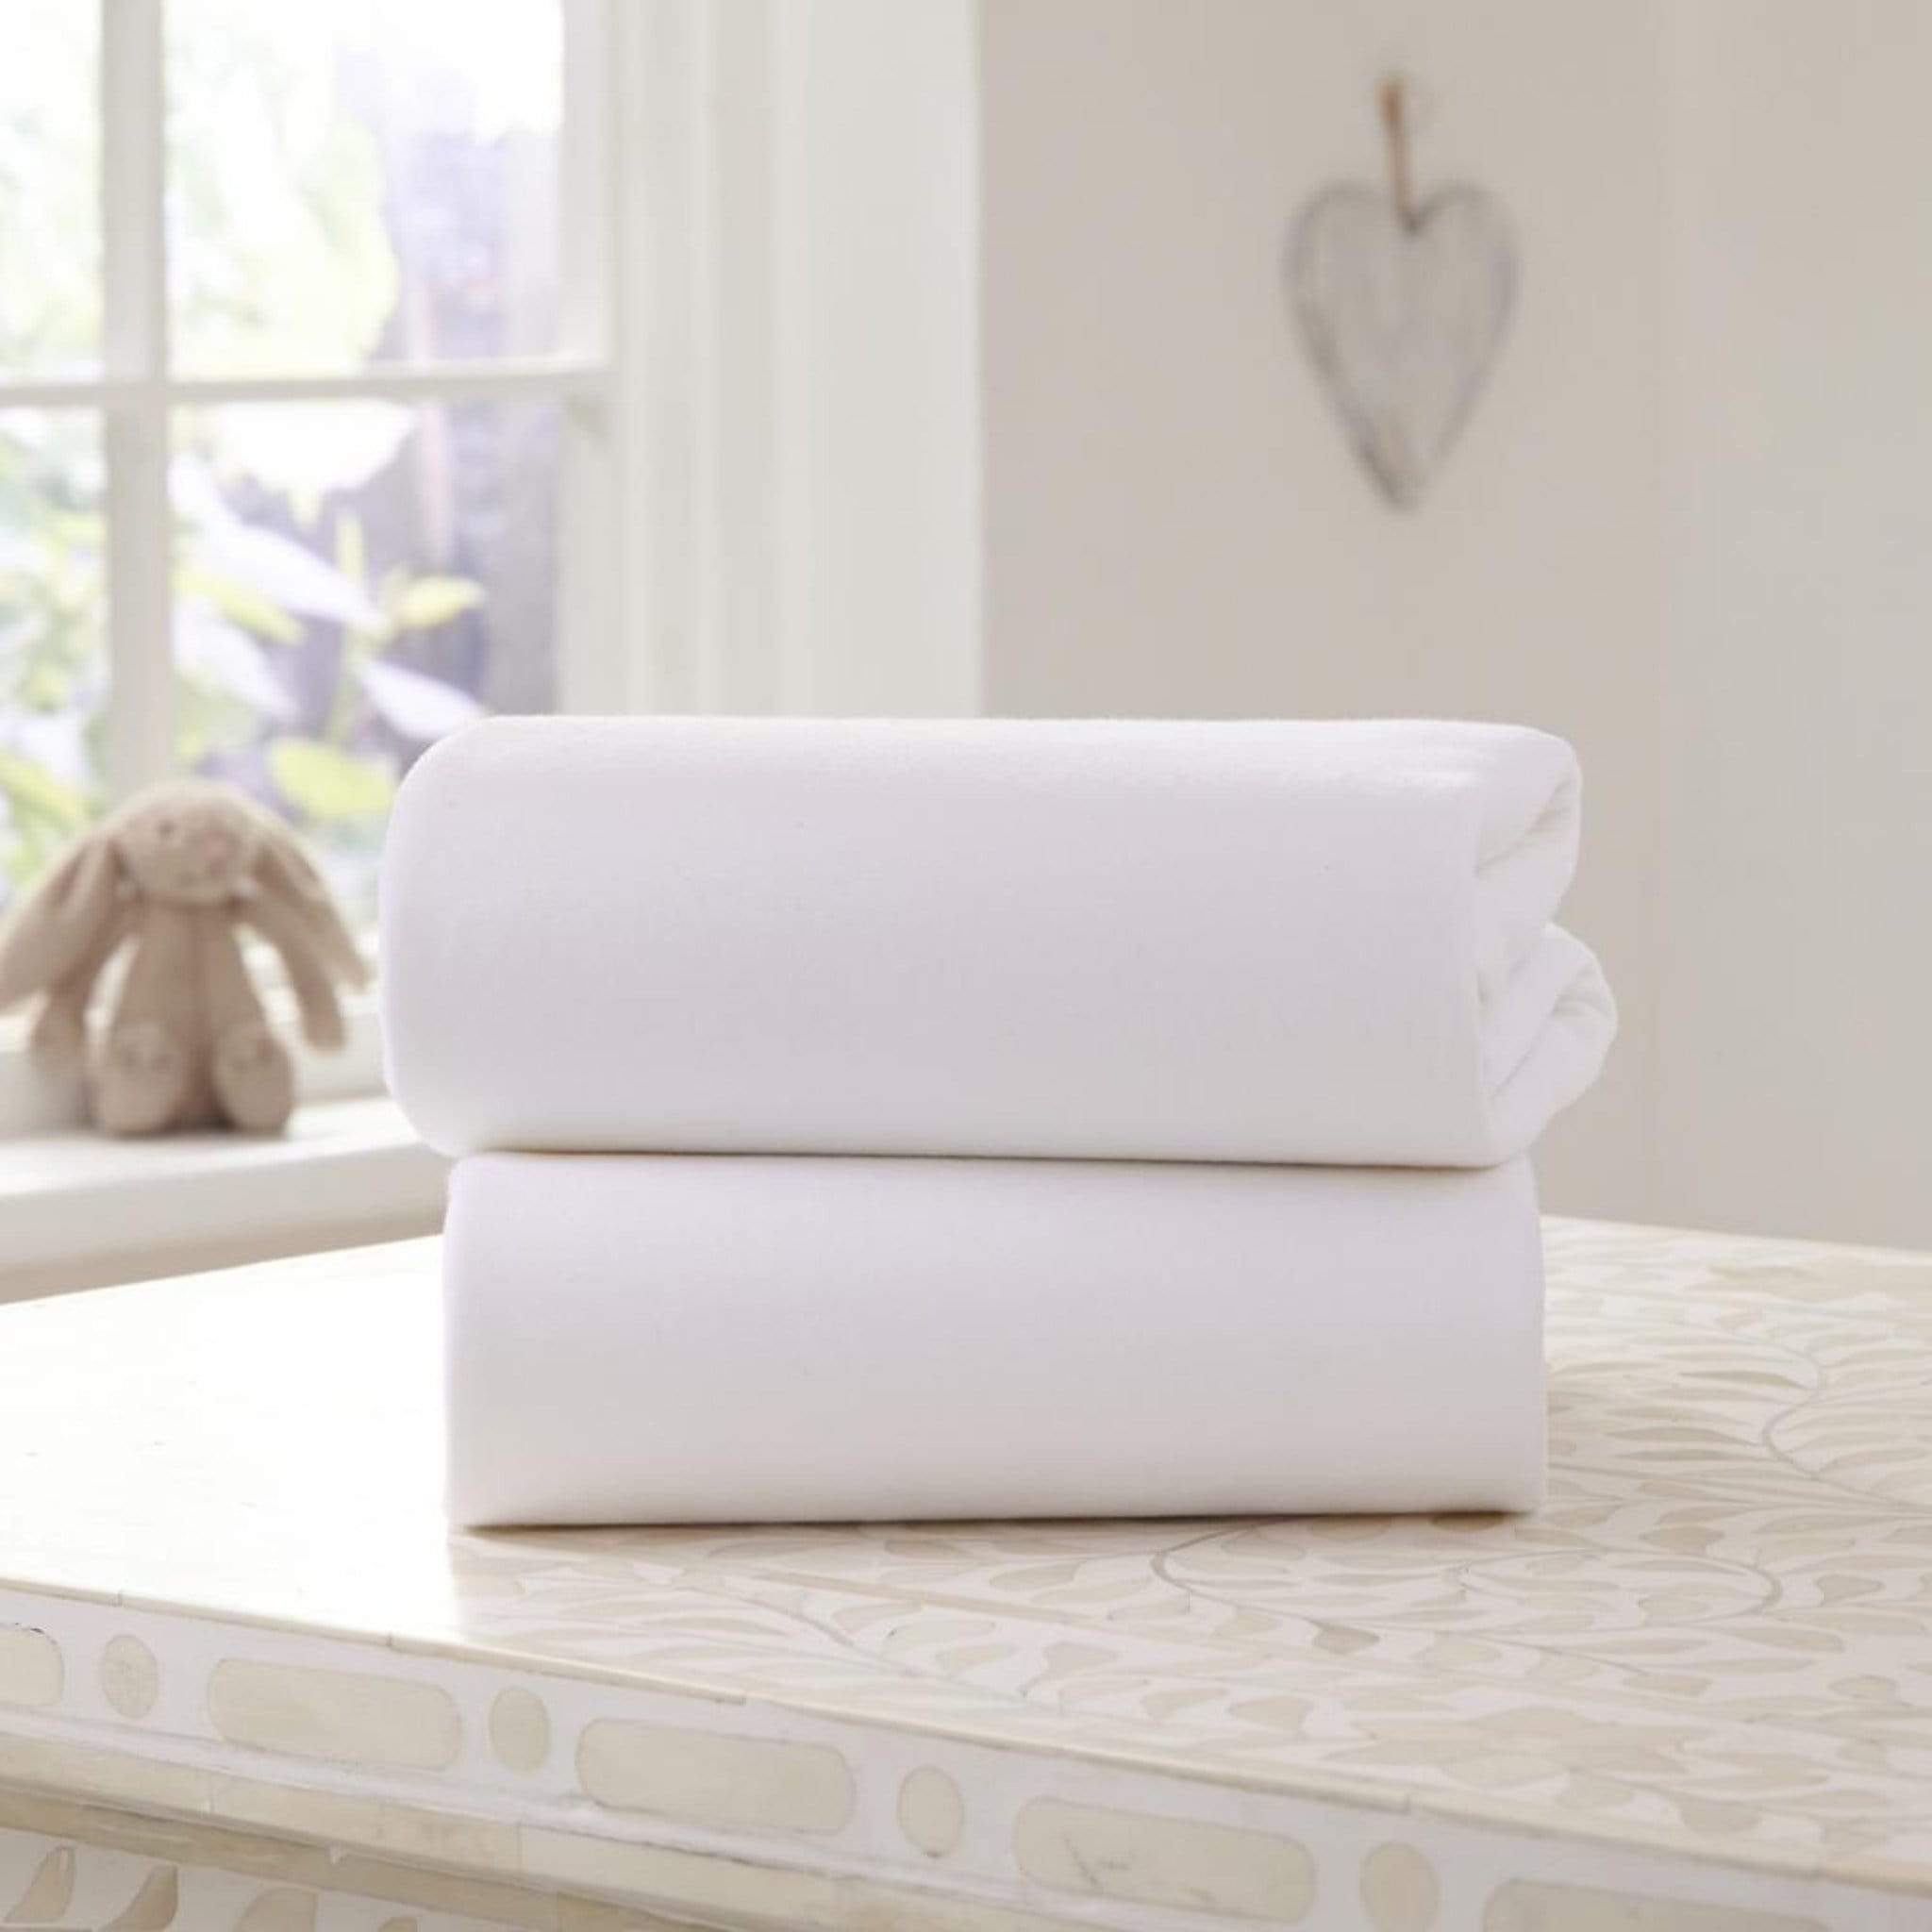 Clair De Lune cot bed sheets Clair De Lune 2 Pack Universal Bedside Crib Fitted Sheets White CL5957WE